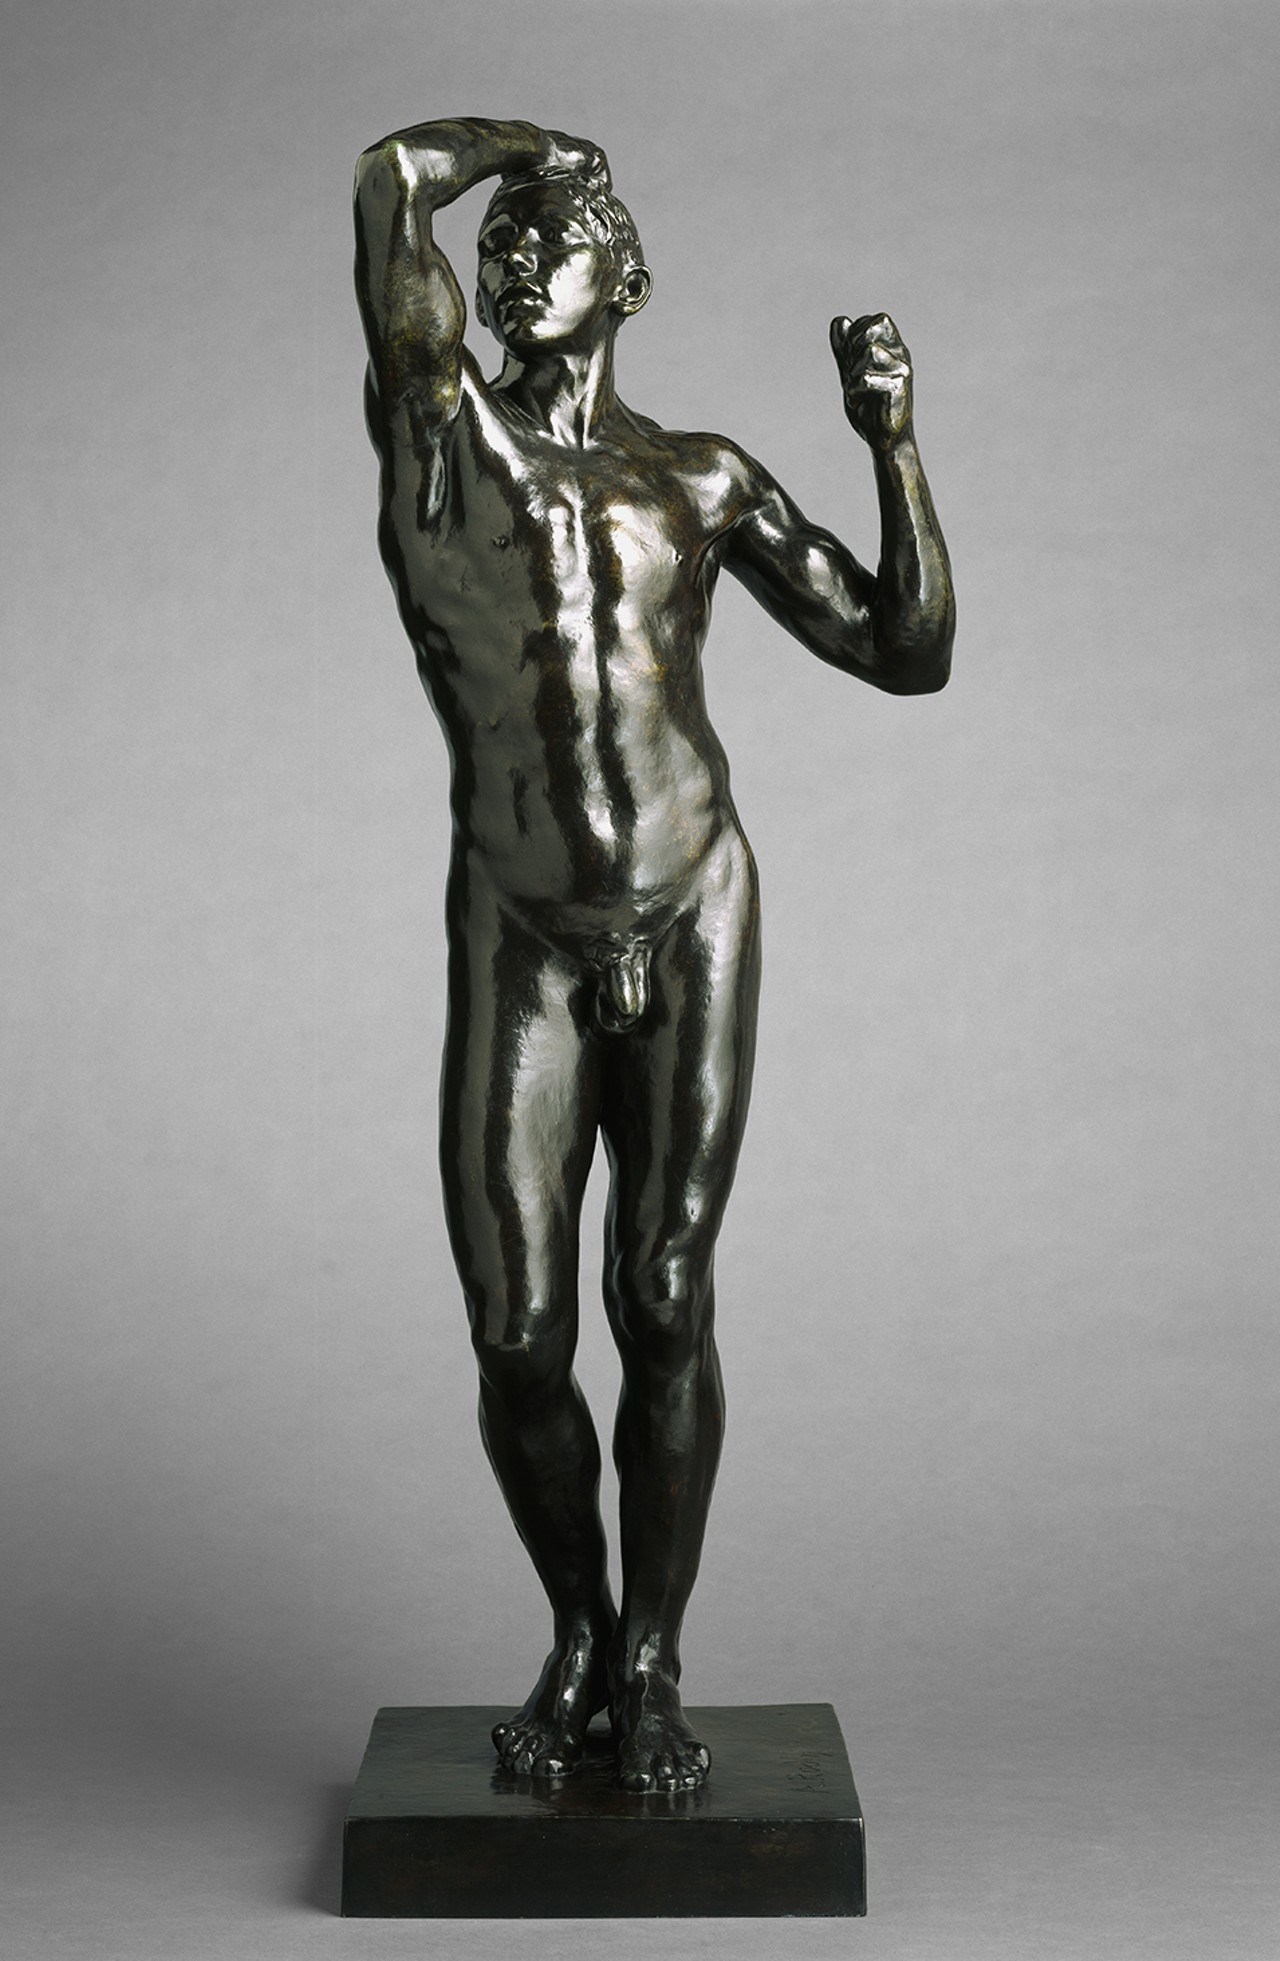 Auguste Rodin (French, 1840&#150;1917). The Age of Bronze, medium- sized model, first reduction, 1876; cast 1967. Bronze, 41 1/4 x 15 x 13 in. (104.8 x 38.1 x 33 cm). Brooklyn Museum, Gift of B. Gerald Cantor, 68.49. (Photo: Brooklyn Museum)